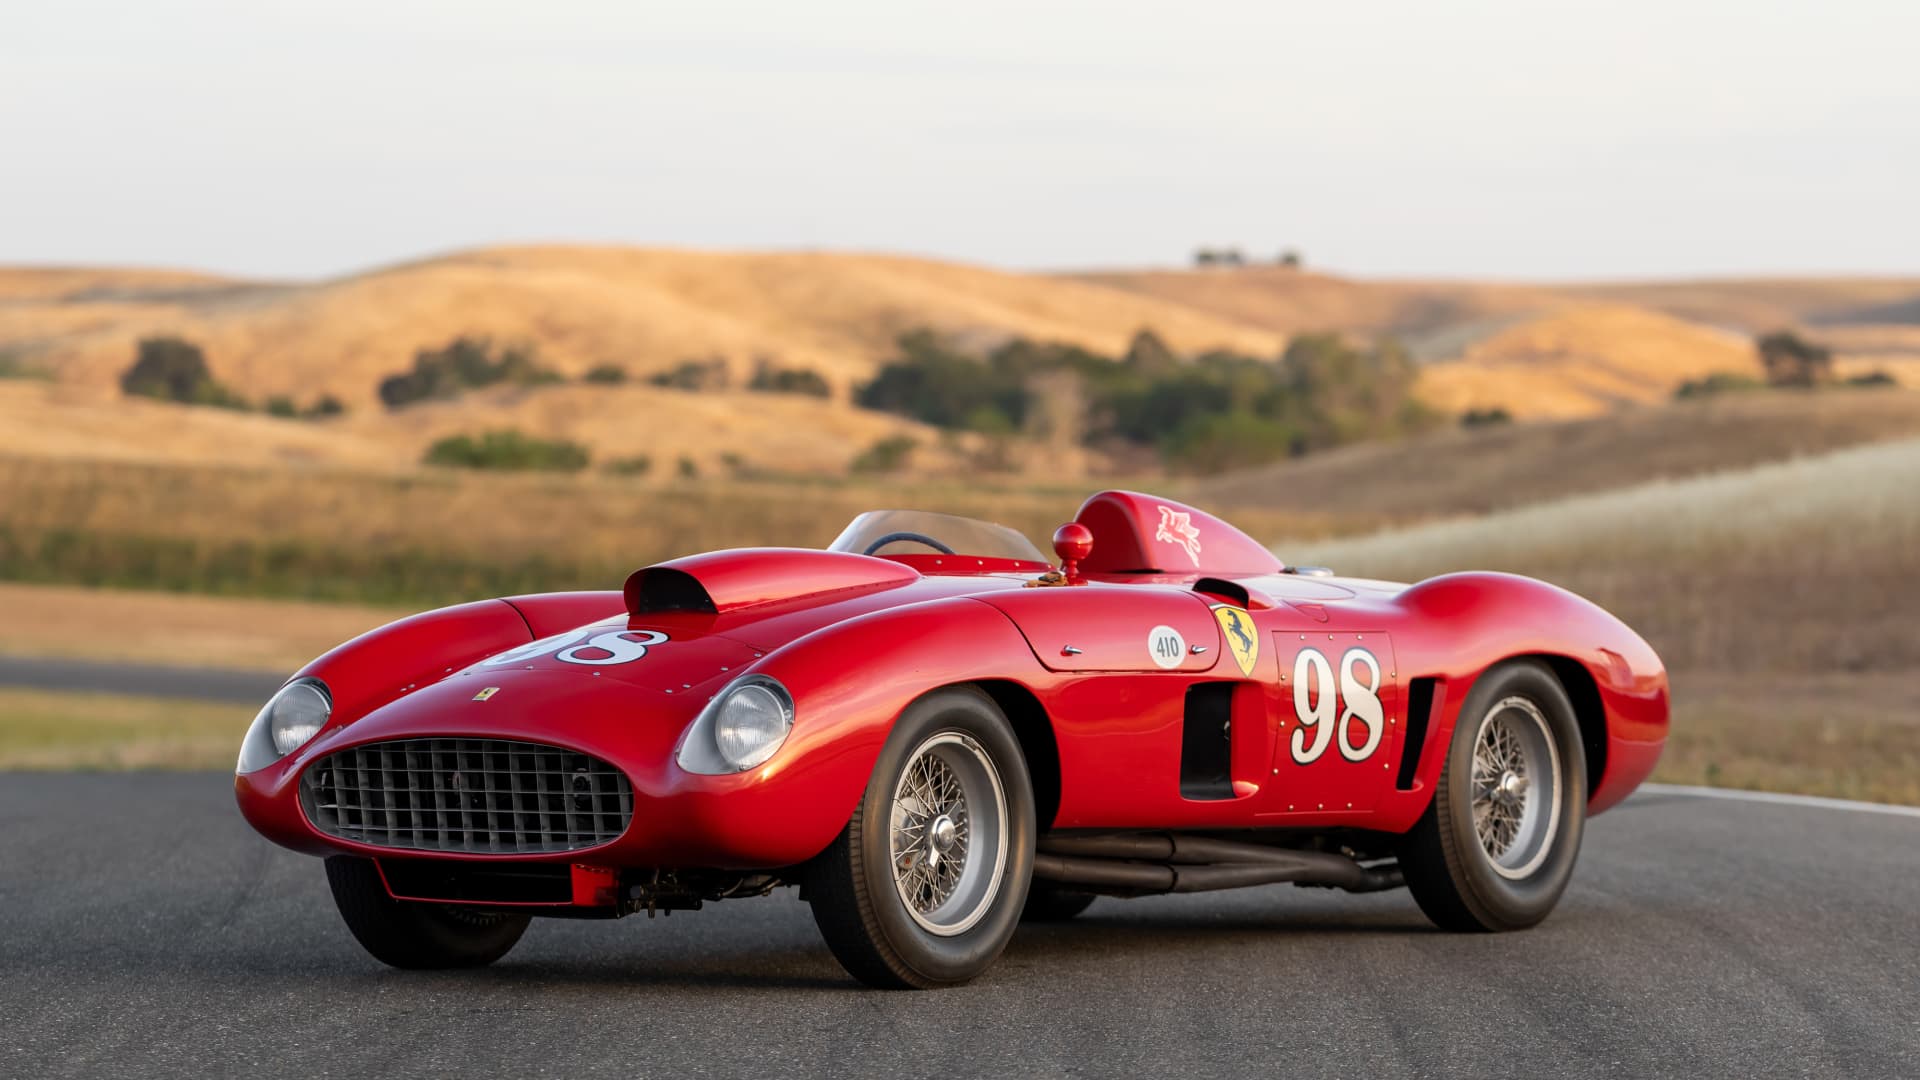 Classic car auctions in Monterey score a record $469 million